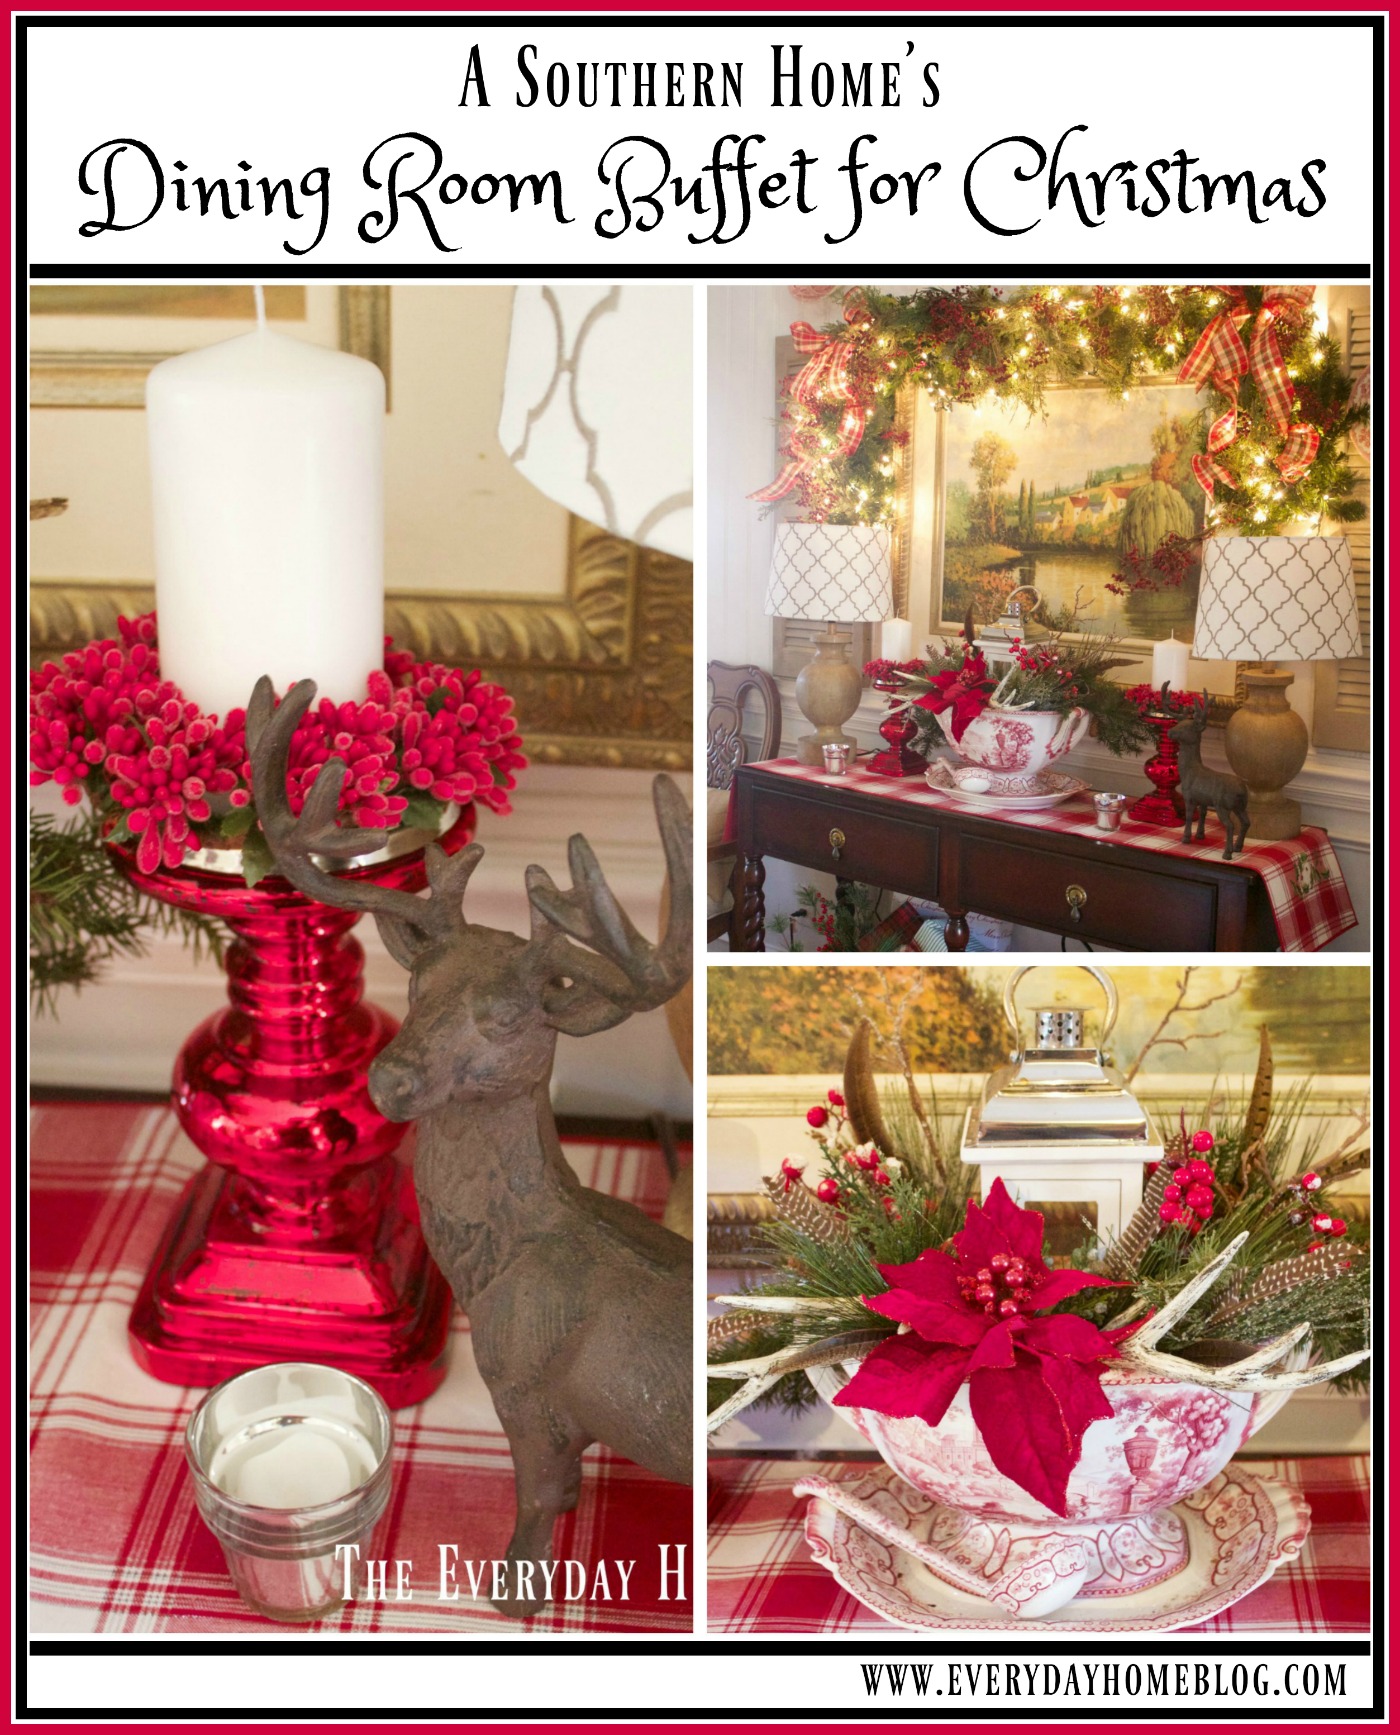 dining-room-buffet-for-christmas-in-a-southern-home